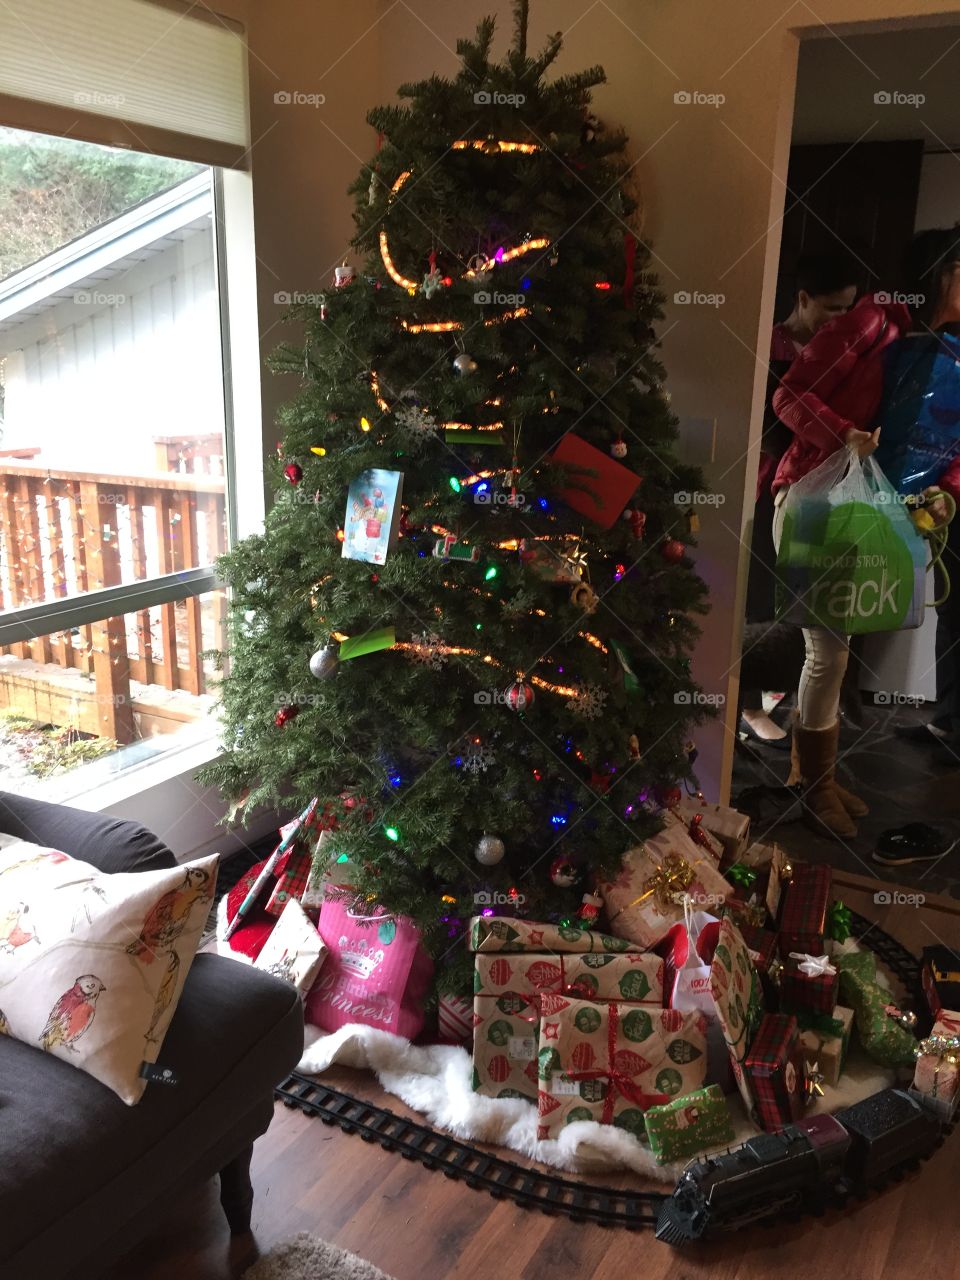 Christmas, Christmas tree, gifts, presents, boxes, train, train track, ribbons, gift wrap, wrapper, holiday, under the tree, decorations, festive, festival, party, Christmas morning, December, Santa